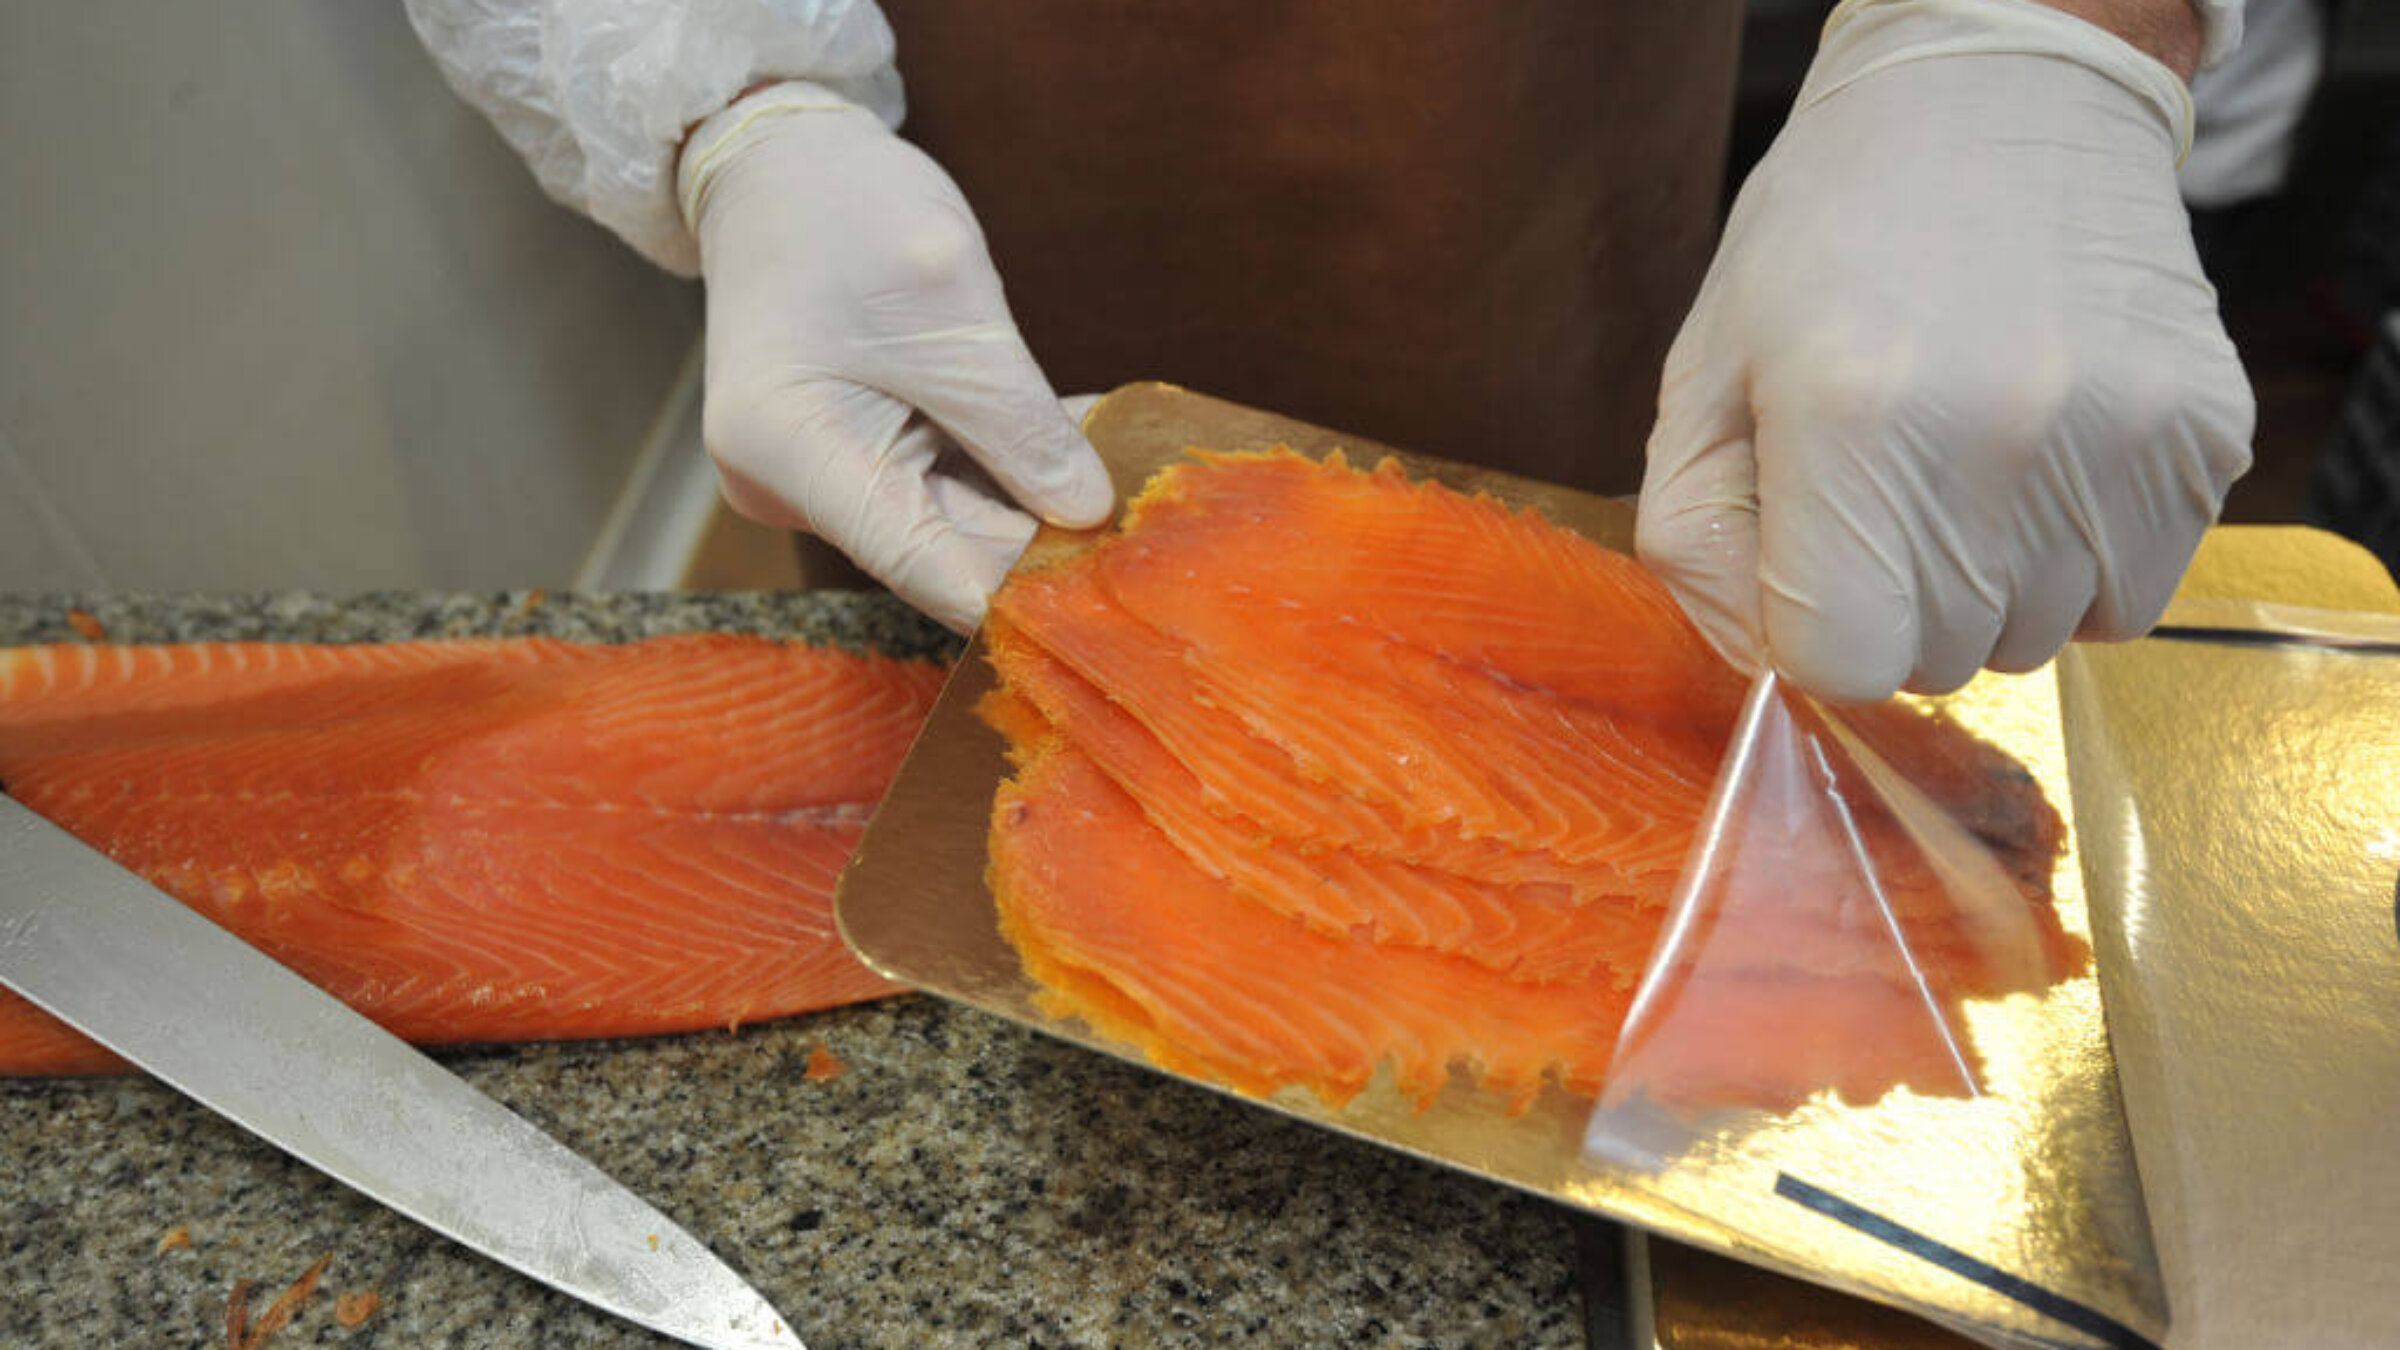 A worker packages slices of salmon in a hand smoked salmon factory in Quiberon in western France on November 23, 2011.